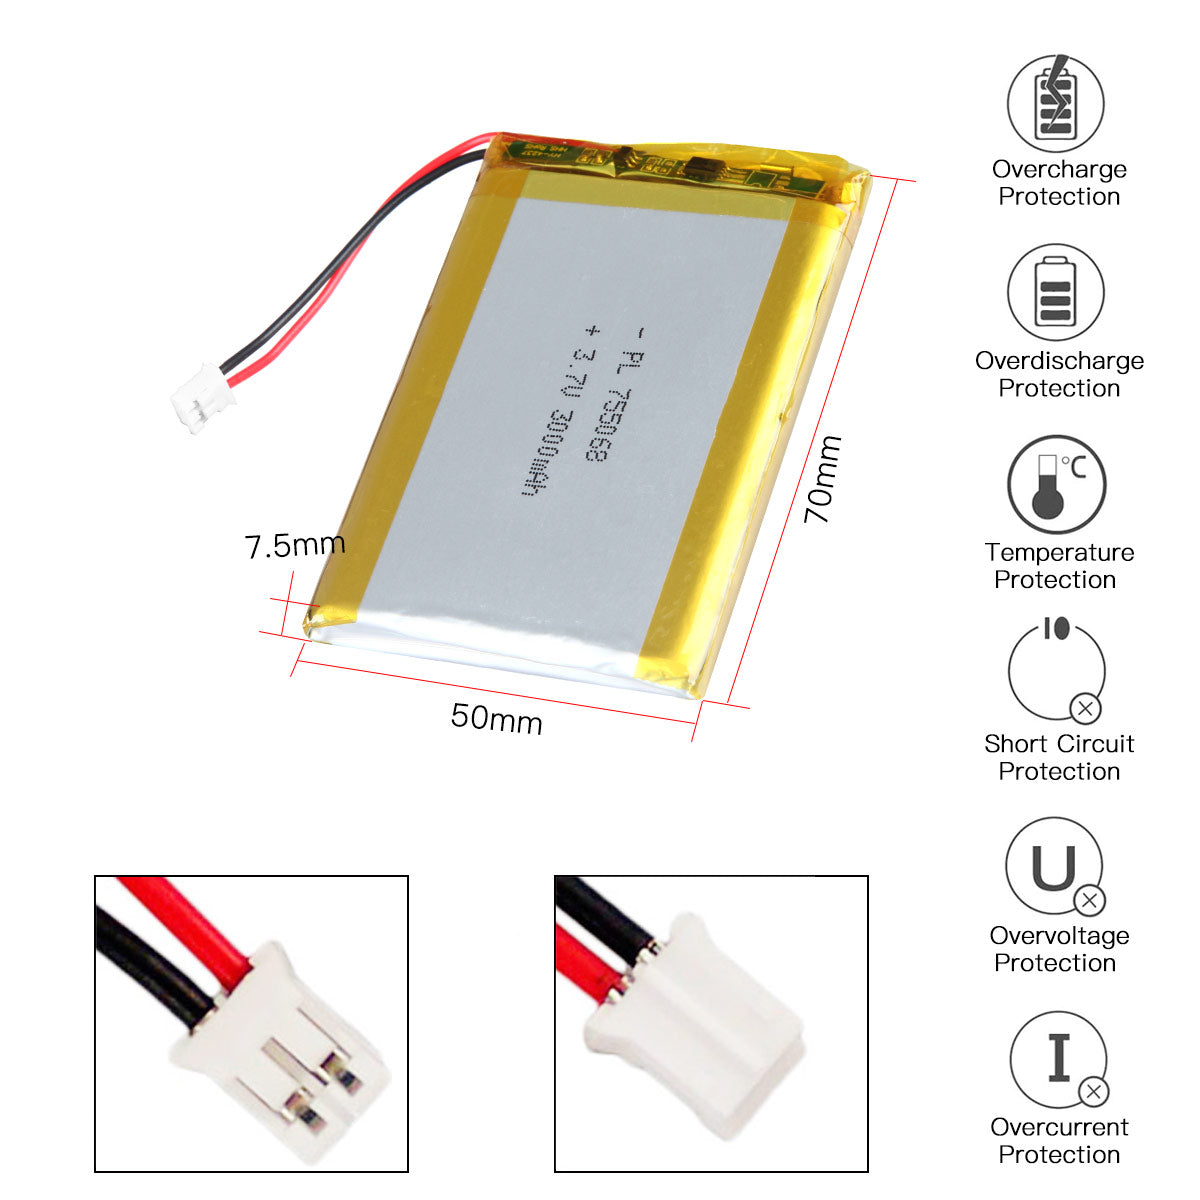 YDL 3.7V 3000mAh 755068 Rechargeable Lipo Battery with JST Connector - YDL Battery